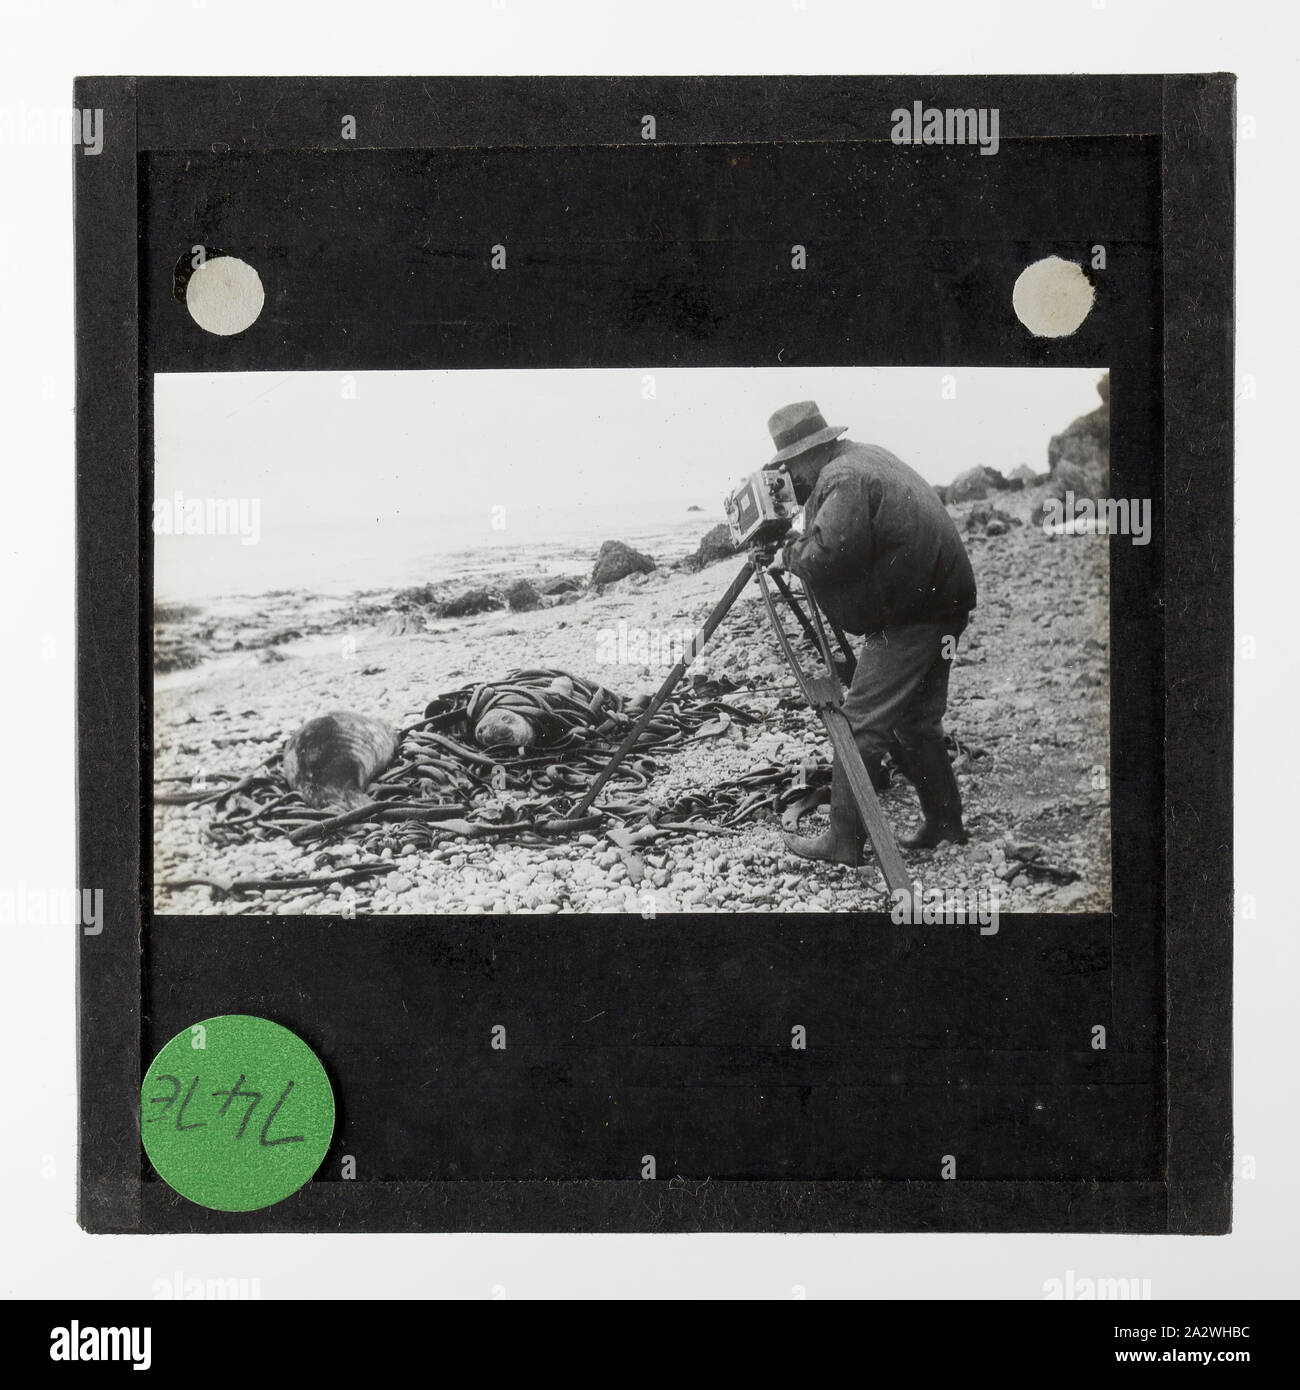 Lantern Slide - 'Captain Frank Hurley Taking Some Cine', Macquarie Island, BANZARE Voyage 2, Antarctica, 1930-1931, Lantern slide of Frank Hurley filming seals on Macquarie Island. One of 328 images in various formats including artworks, photographs, glass negatives and lantern slides Stock Photo